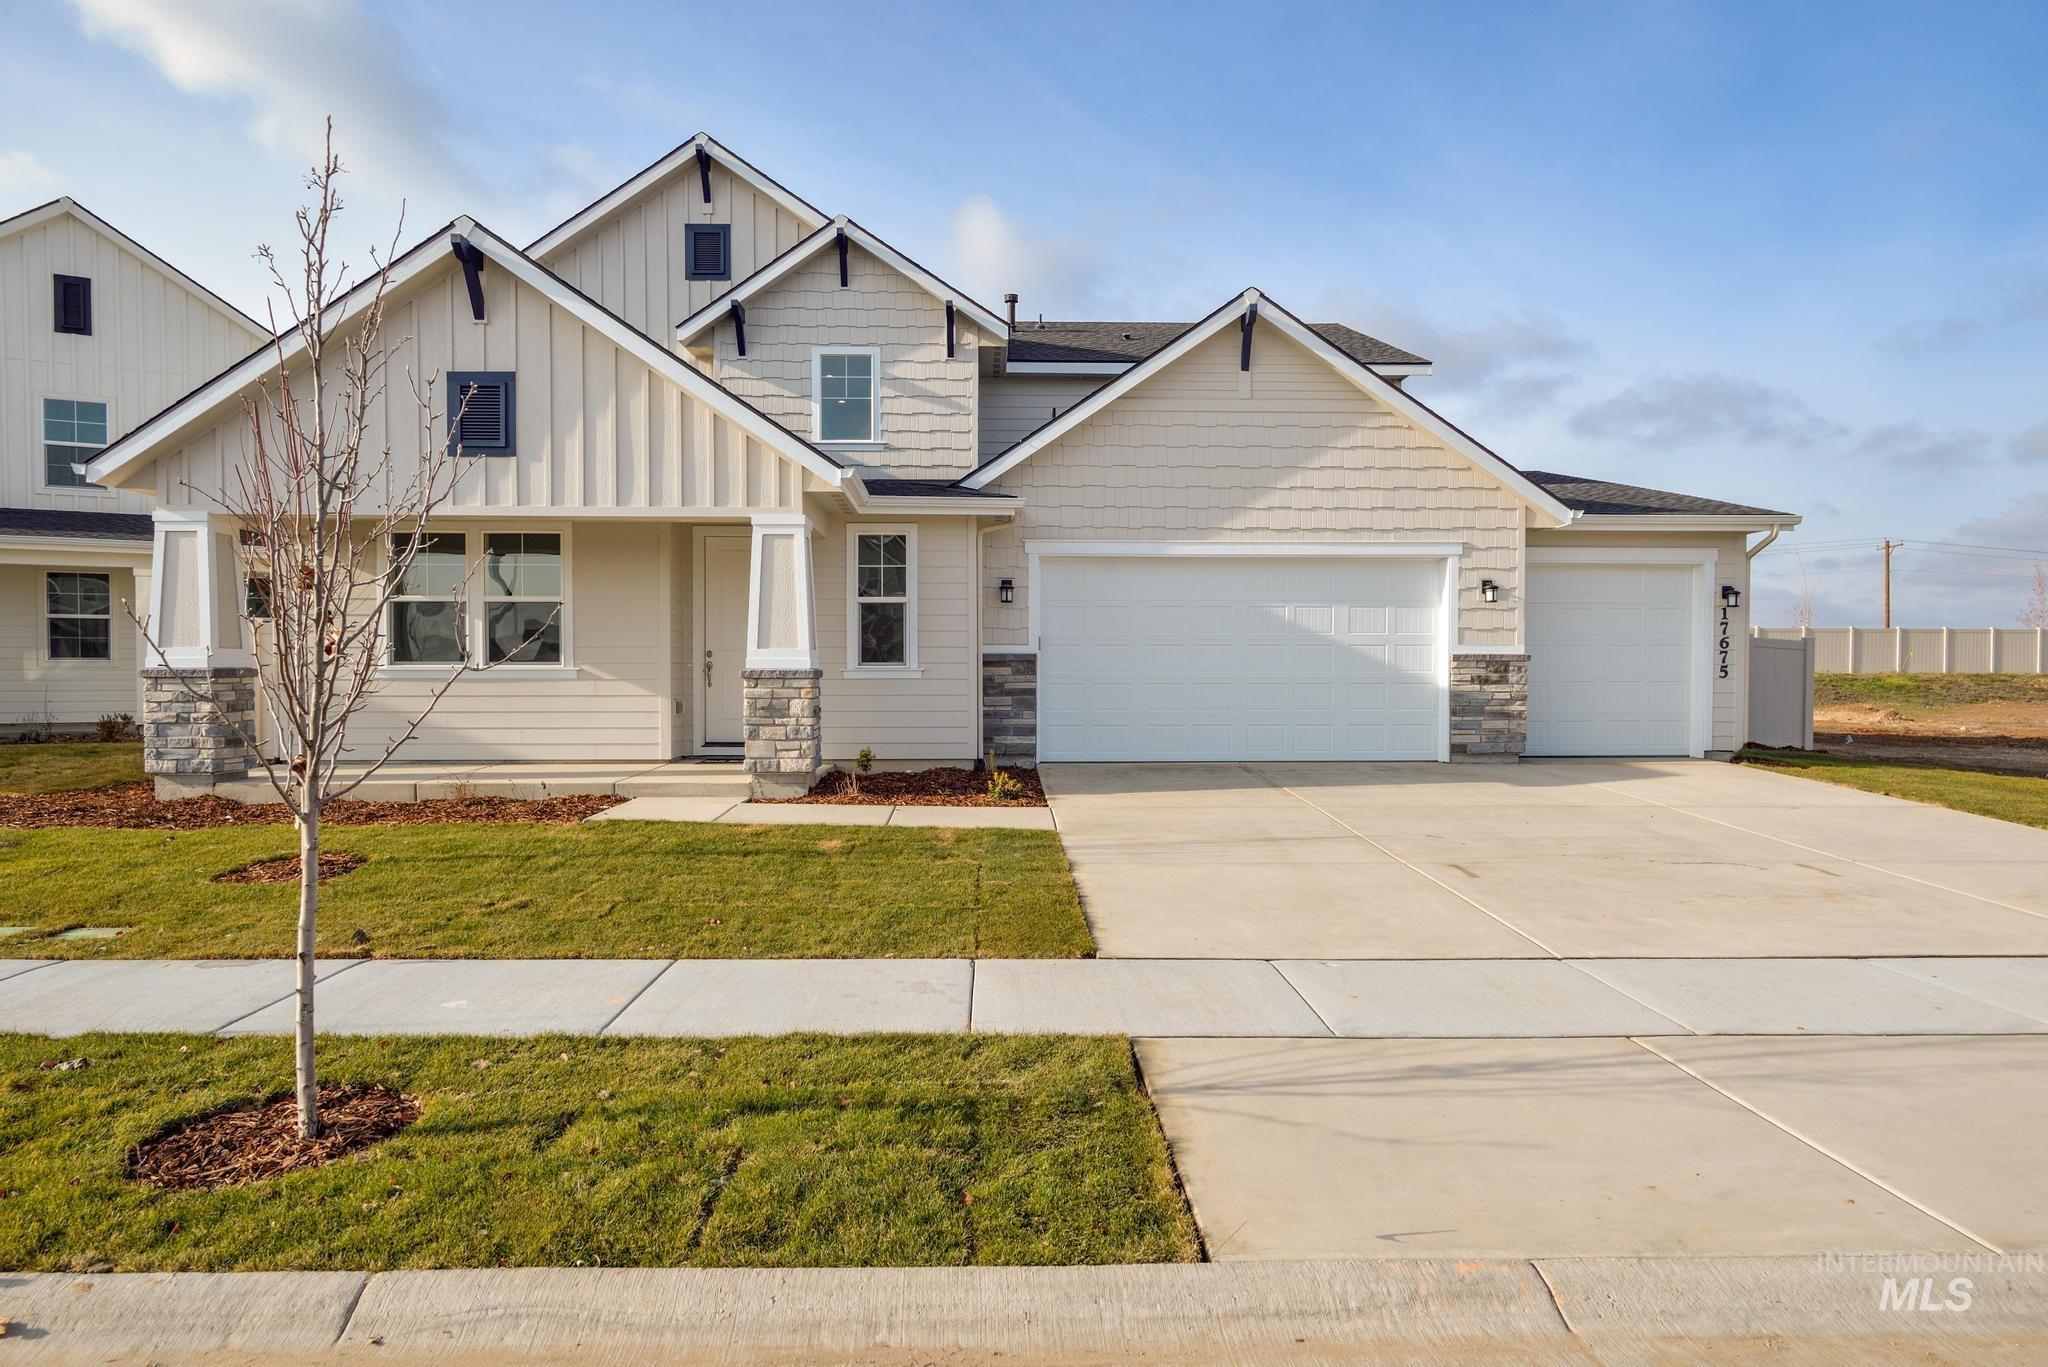 Nampa homes for sale